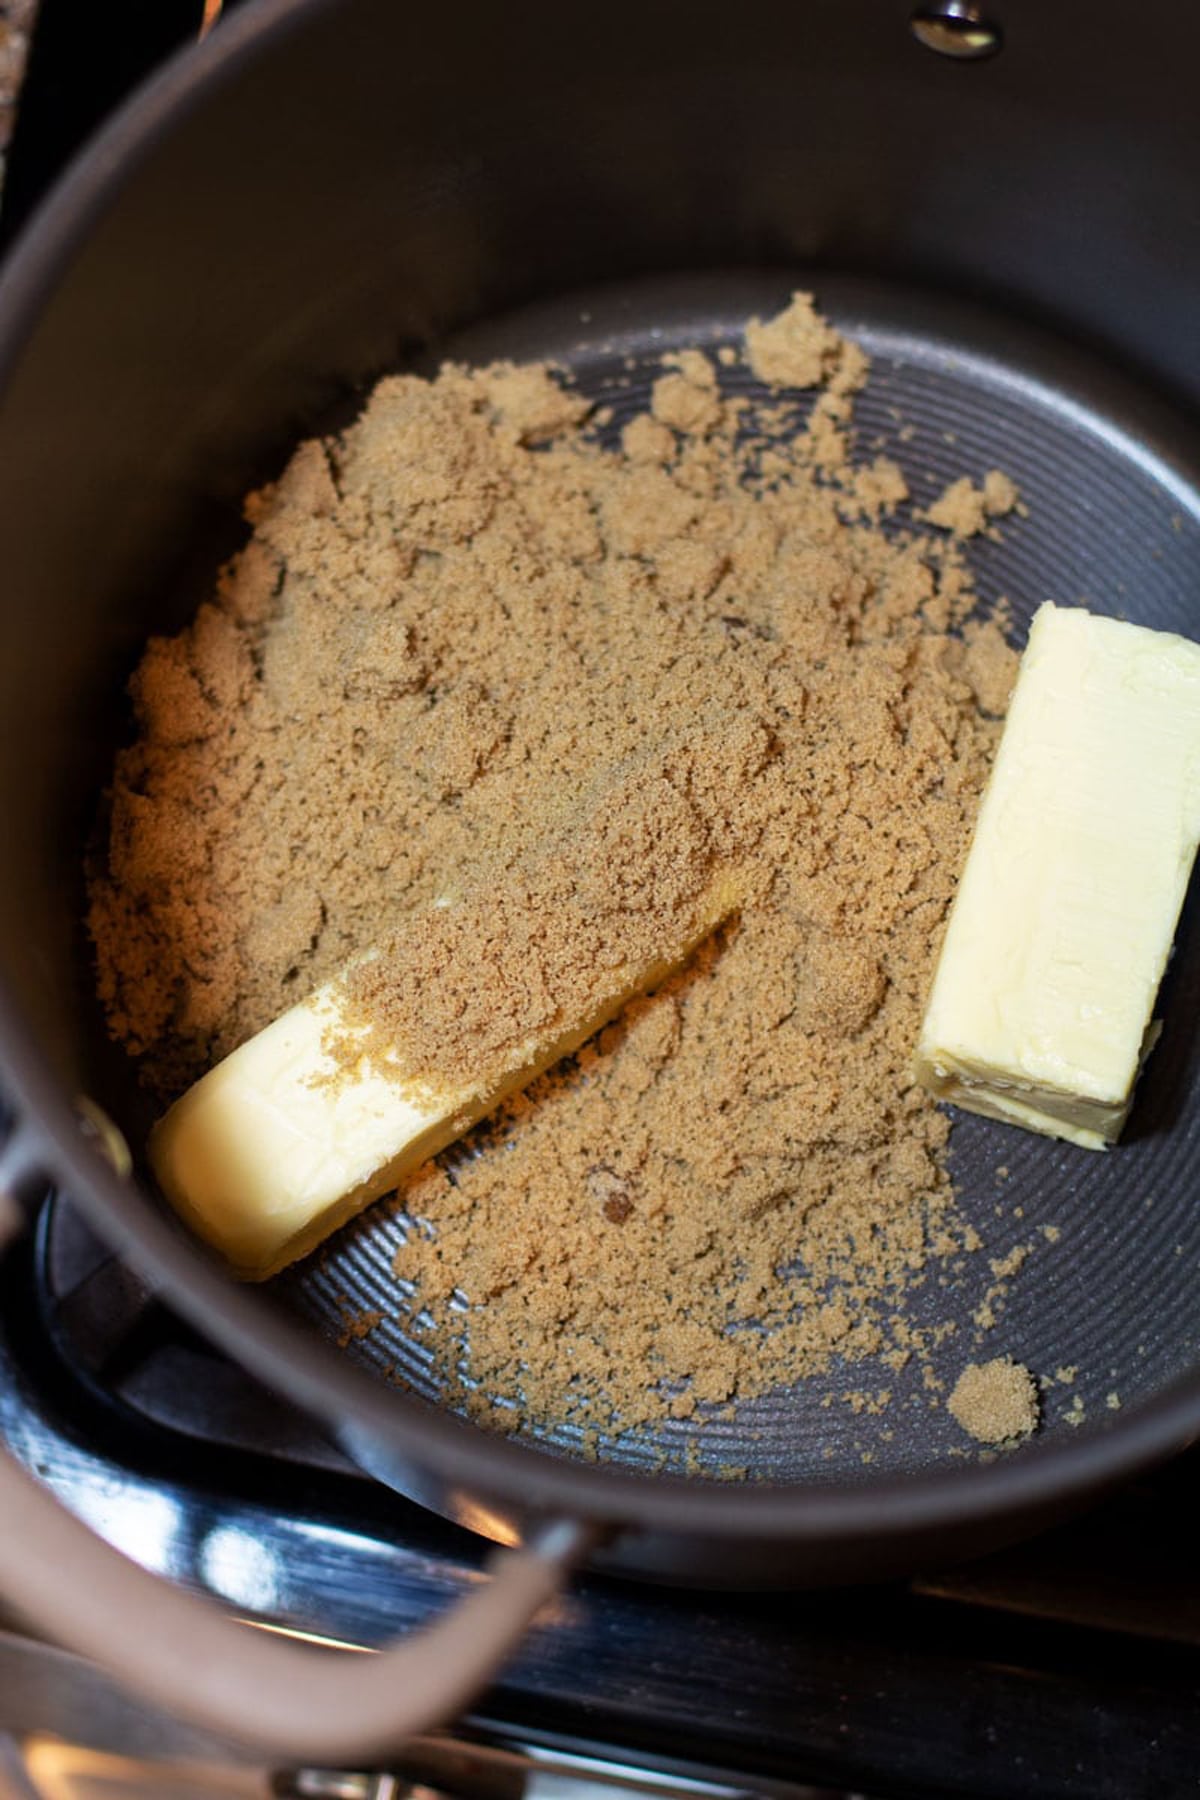 Pot containing brown sugar, margarine and butter for making a homemade caramel sauce.